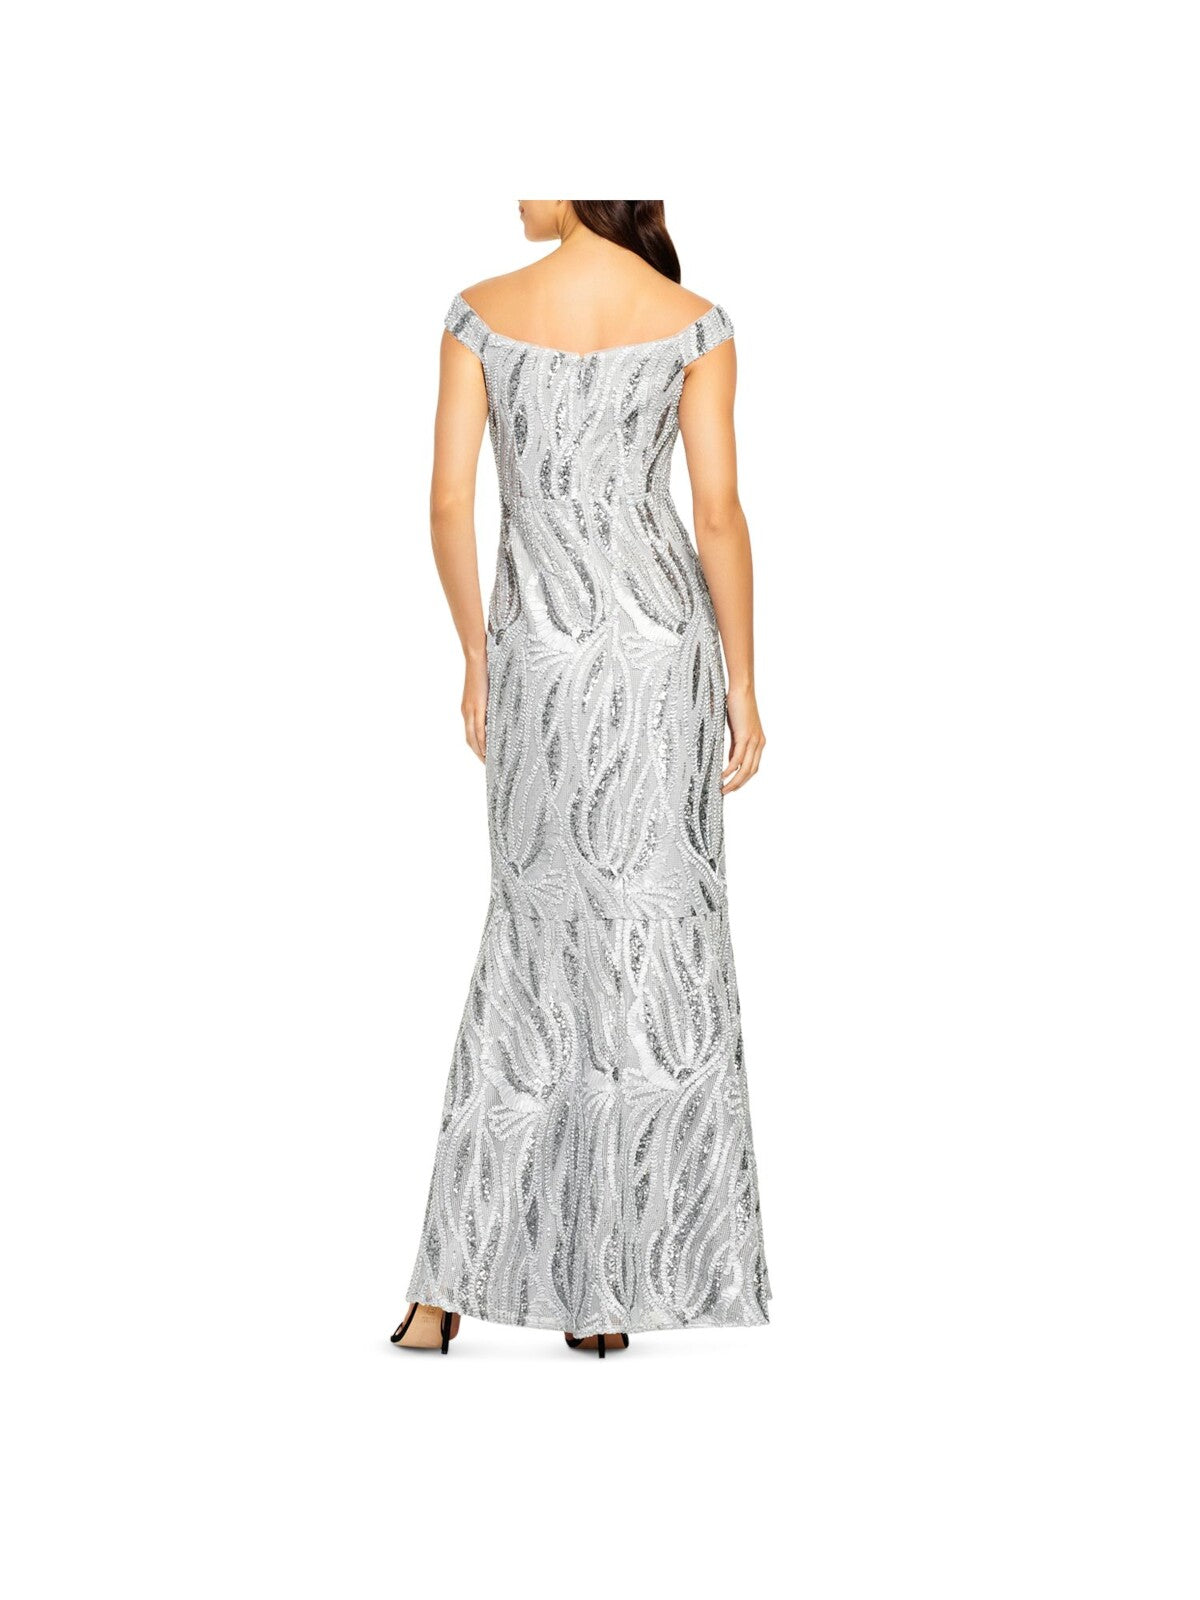 AIDAN MATTOX Womens Sequined Embroidered Trumpet Gown Sleeveless Off Shoulder Maxi Formal Dress